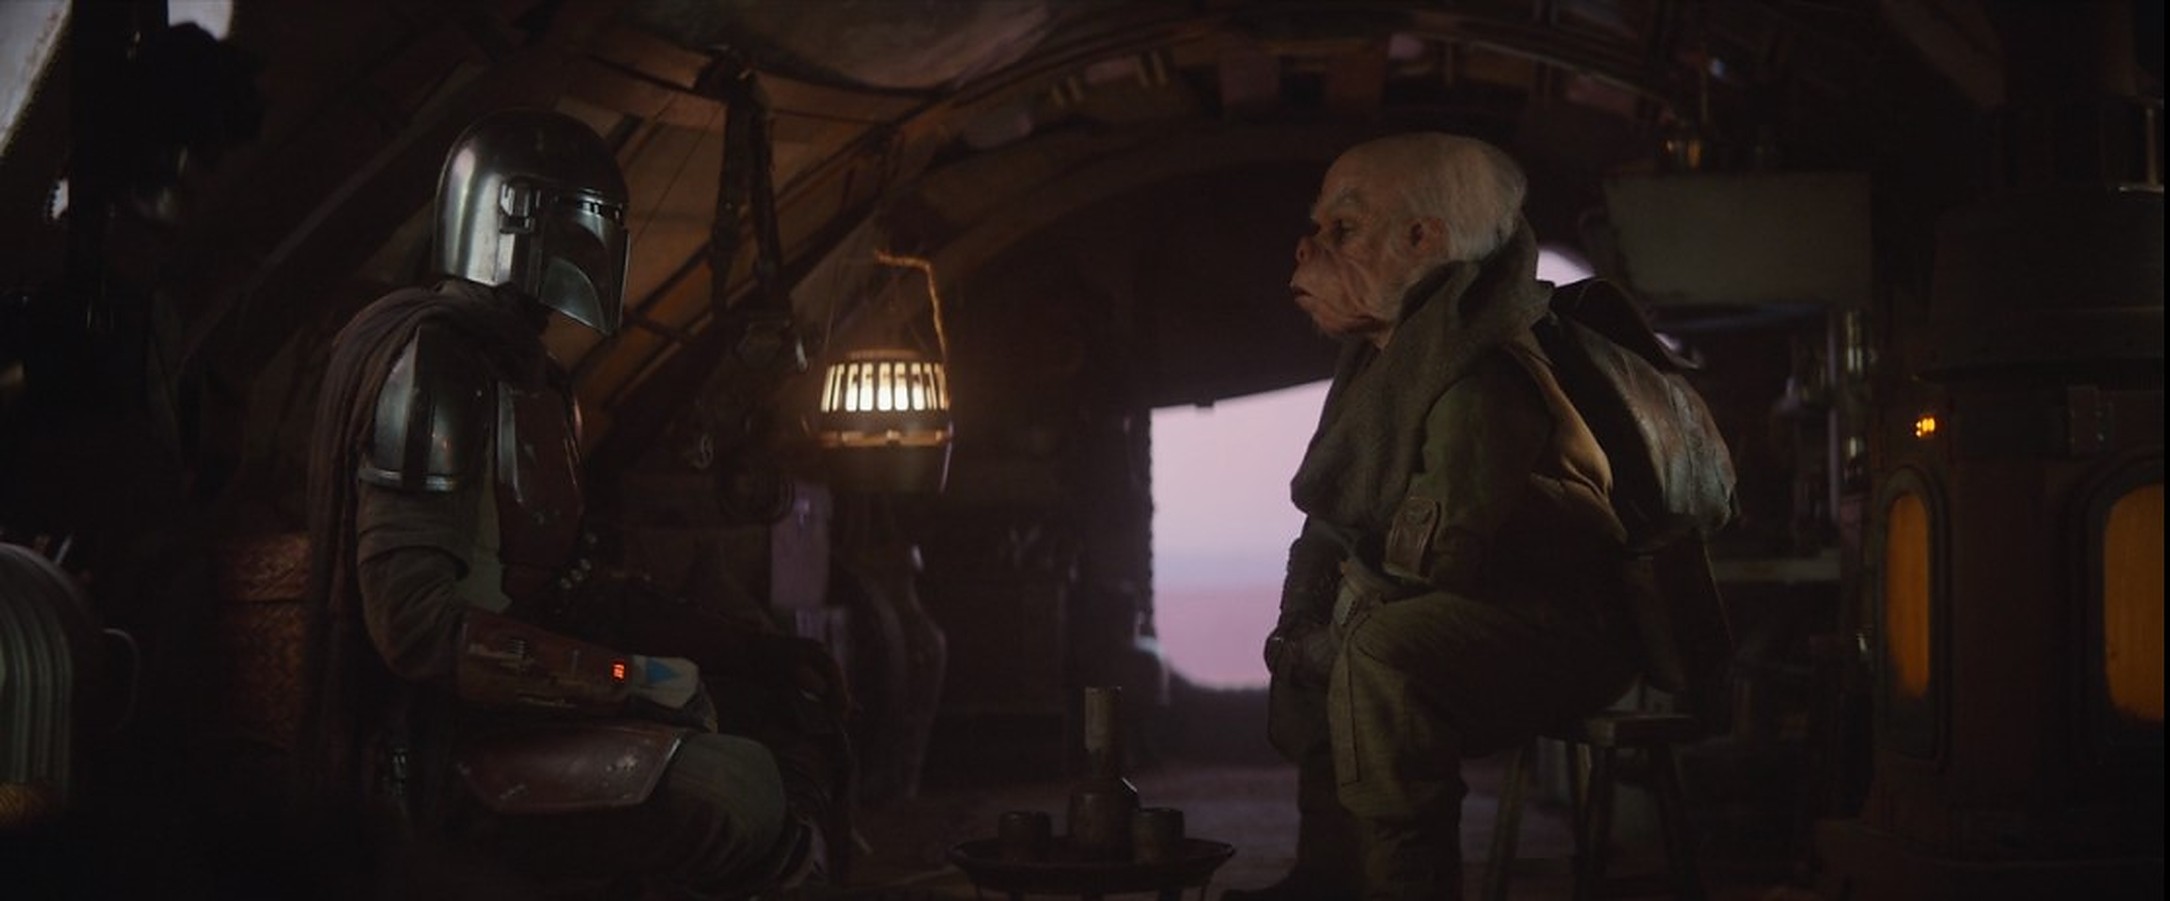 The Star Wars characters the Mandalorian and Kuiil talk in a hut.